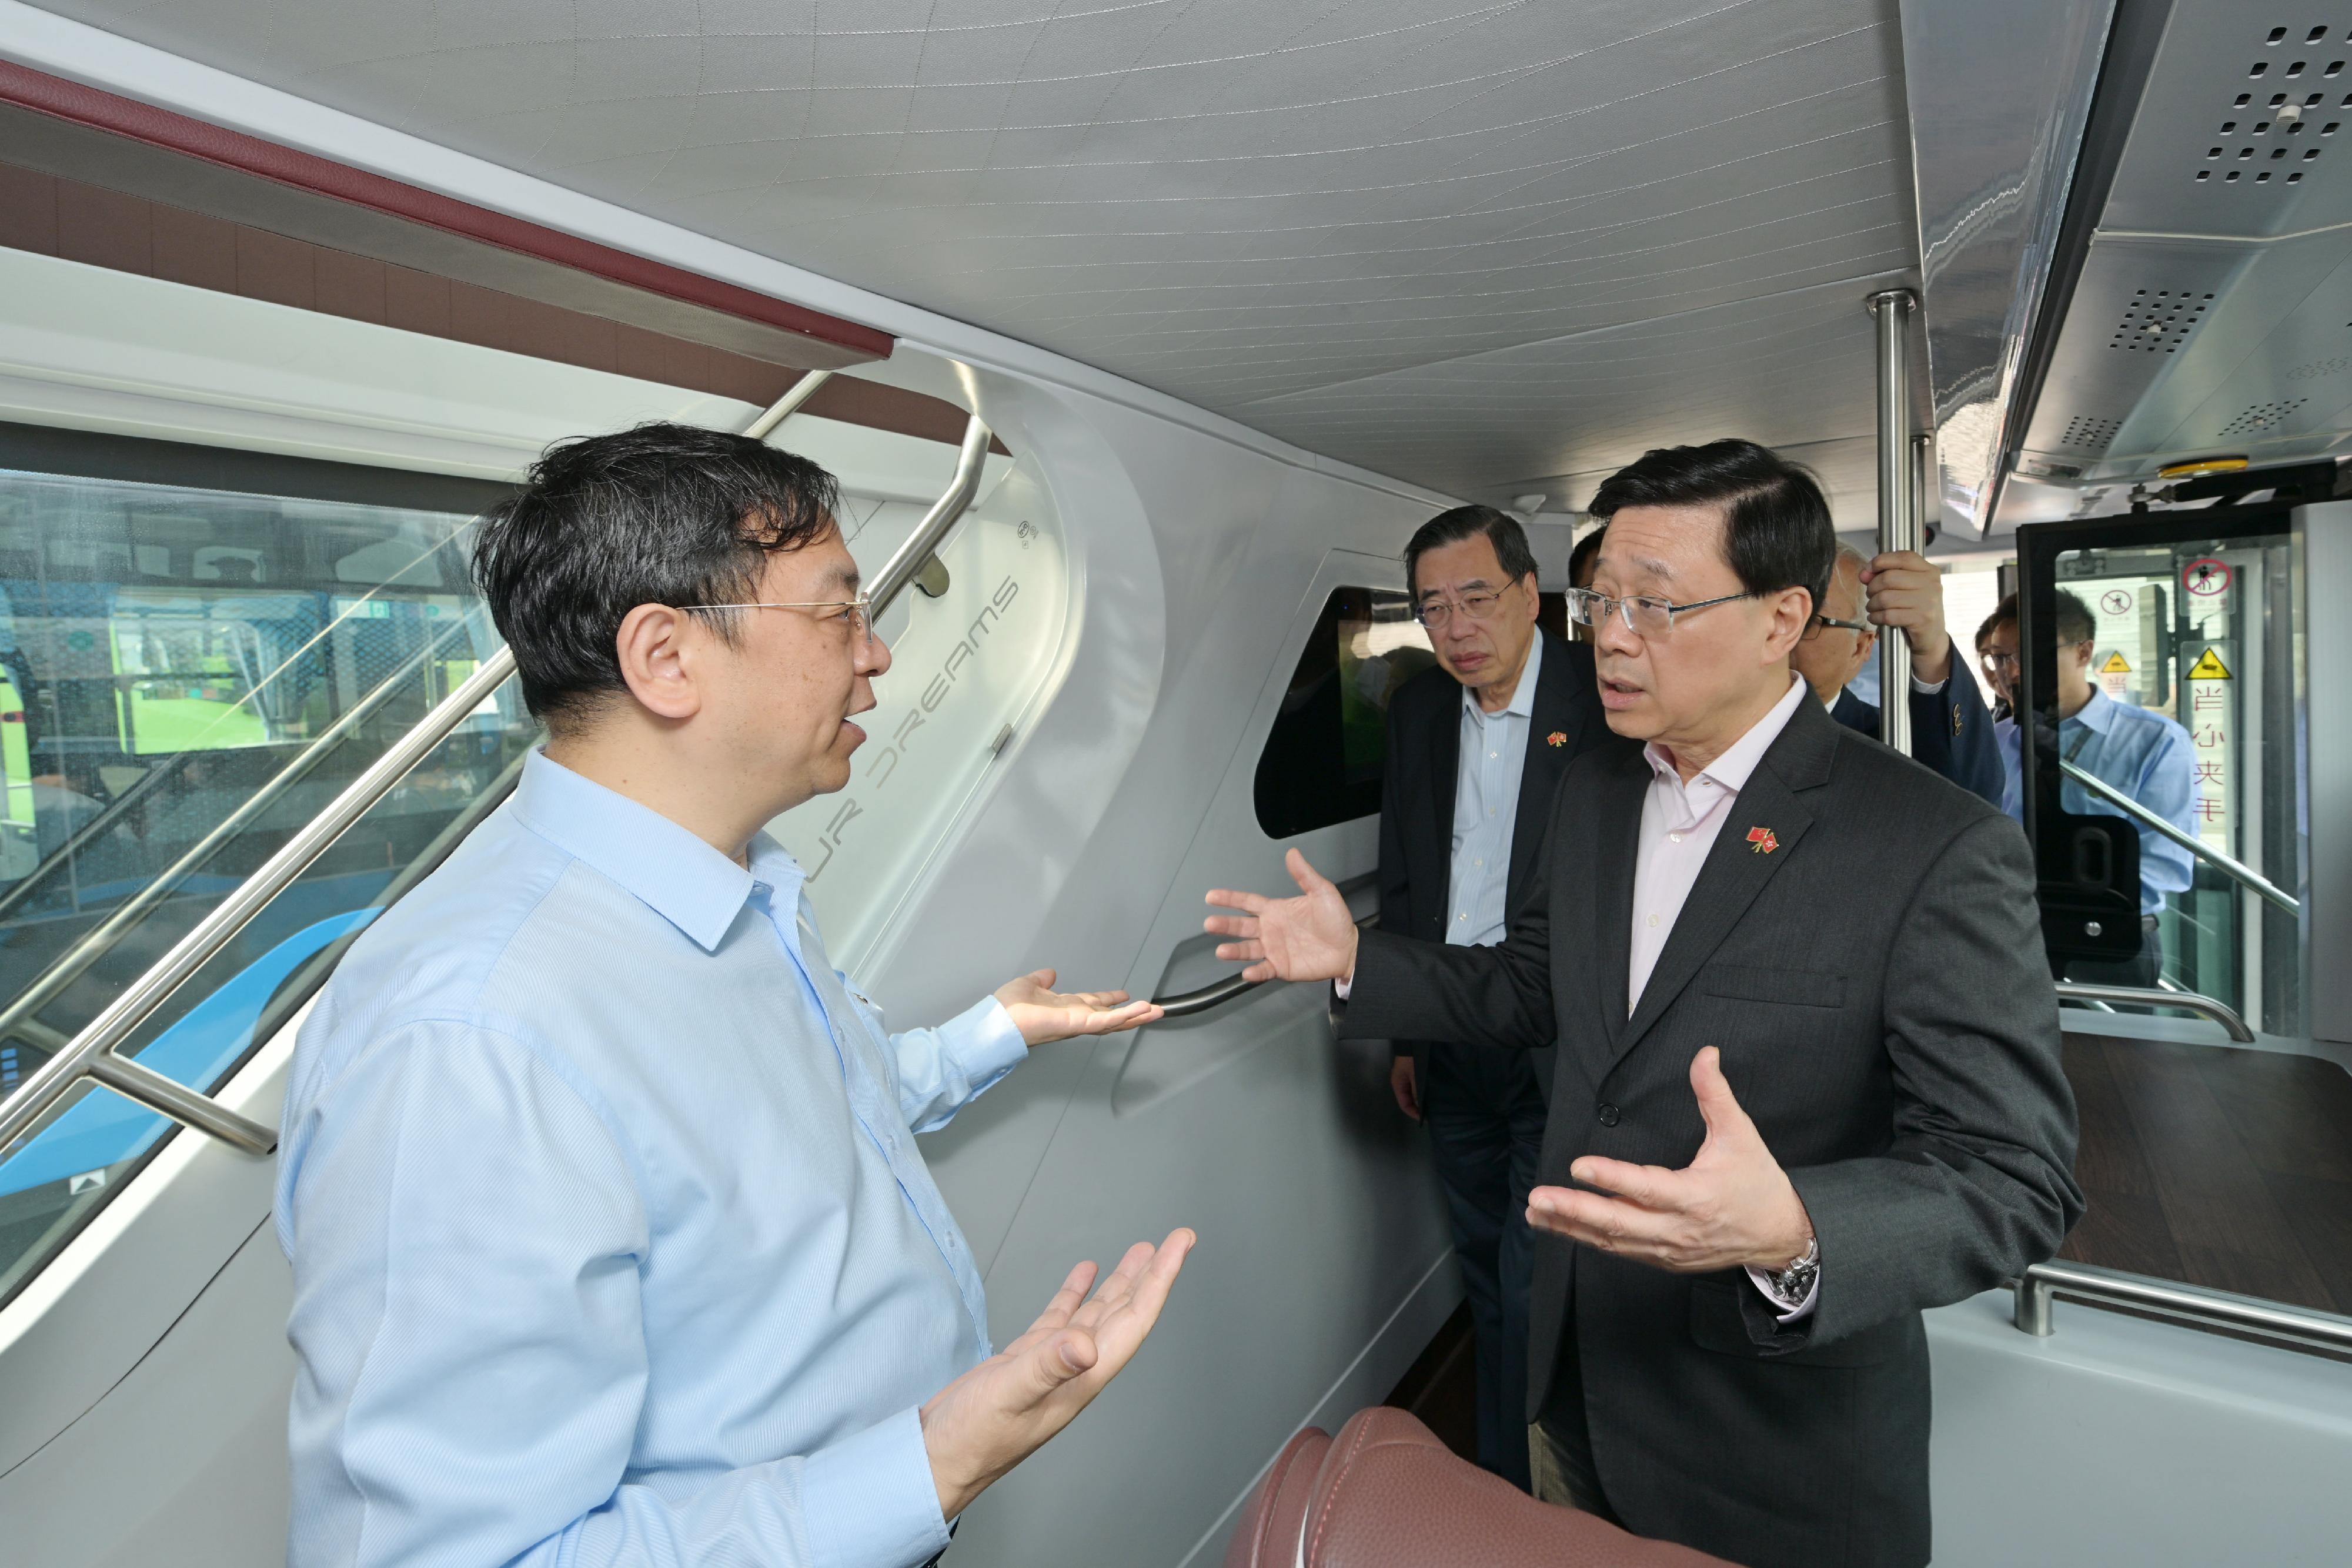 The Chief Executive, Mr John Lee, led a delegation of the Hong Kong Special Administrative Region Government and the Legislative Council to visit Shenzhen today (April 22). Photo shows Mr Lee (first right), accompanied by the Chairman and President of BYD Company Limited, Mr Wang Chuanfu (first left), visiting a BYD Bus.